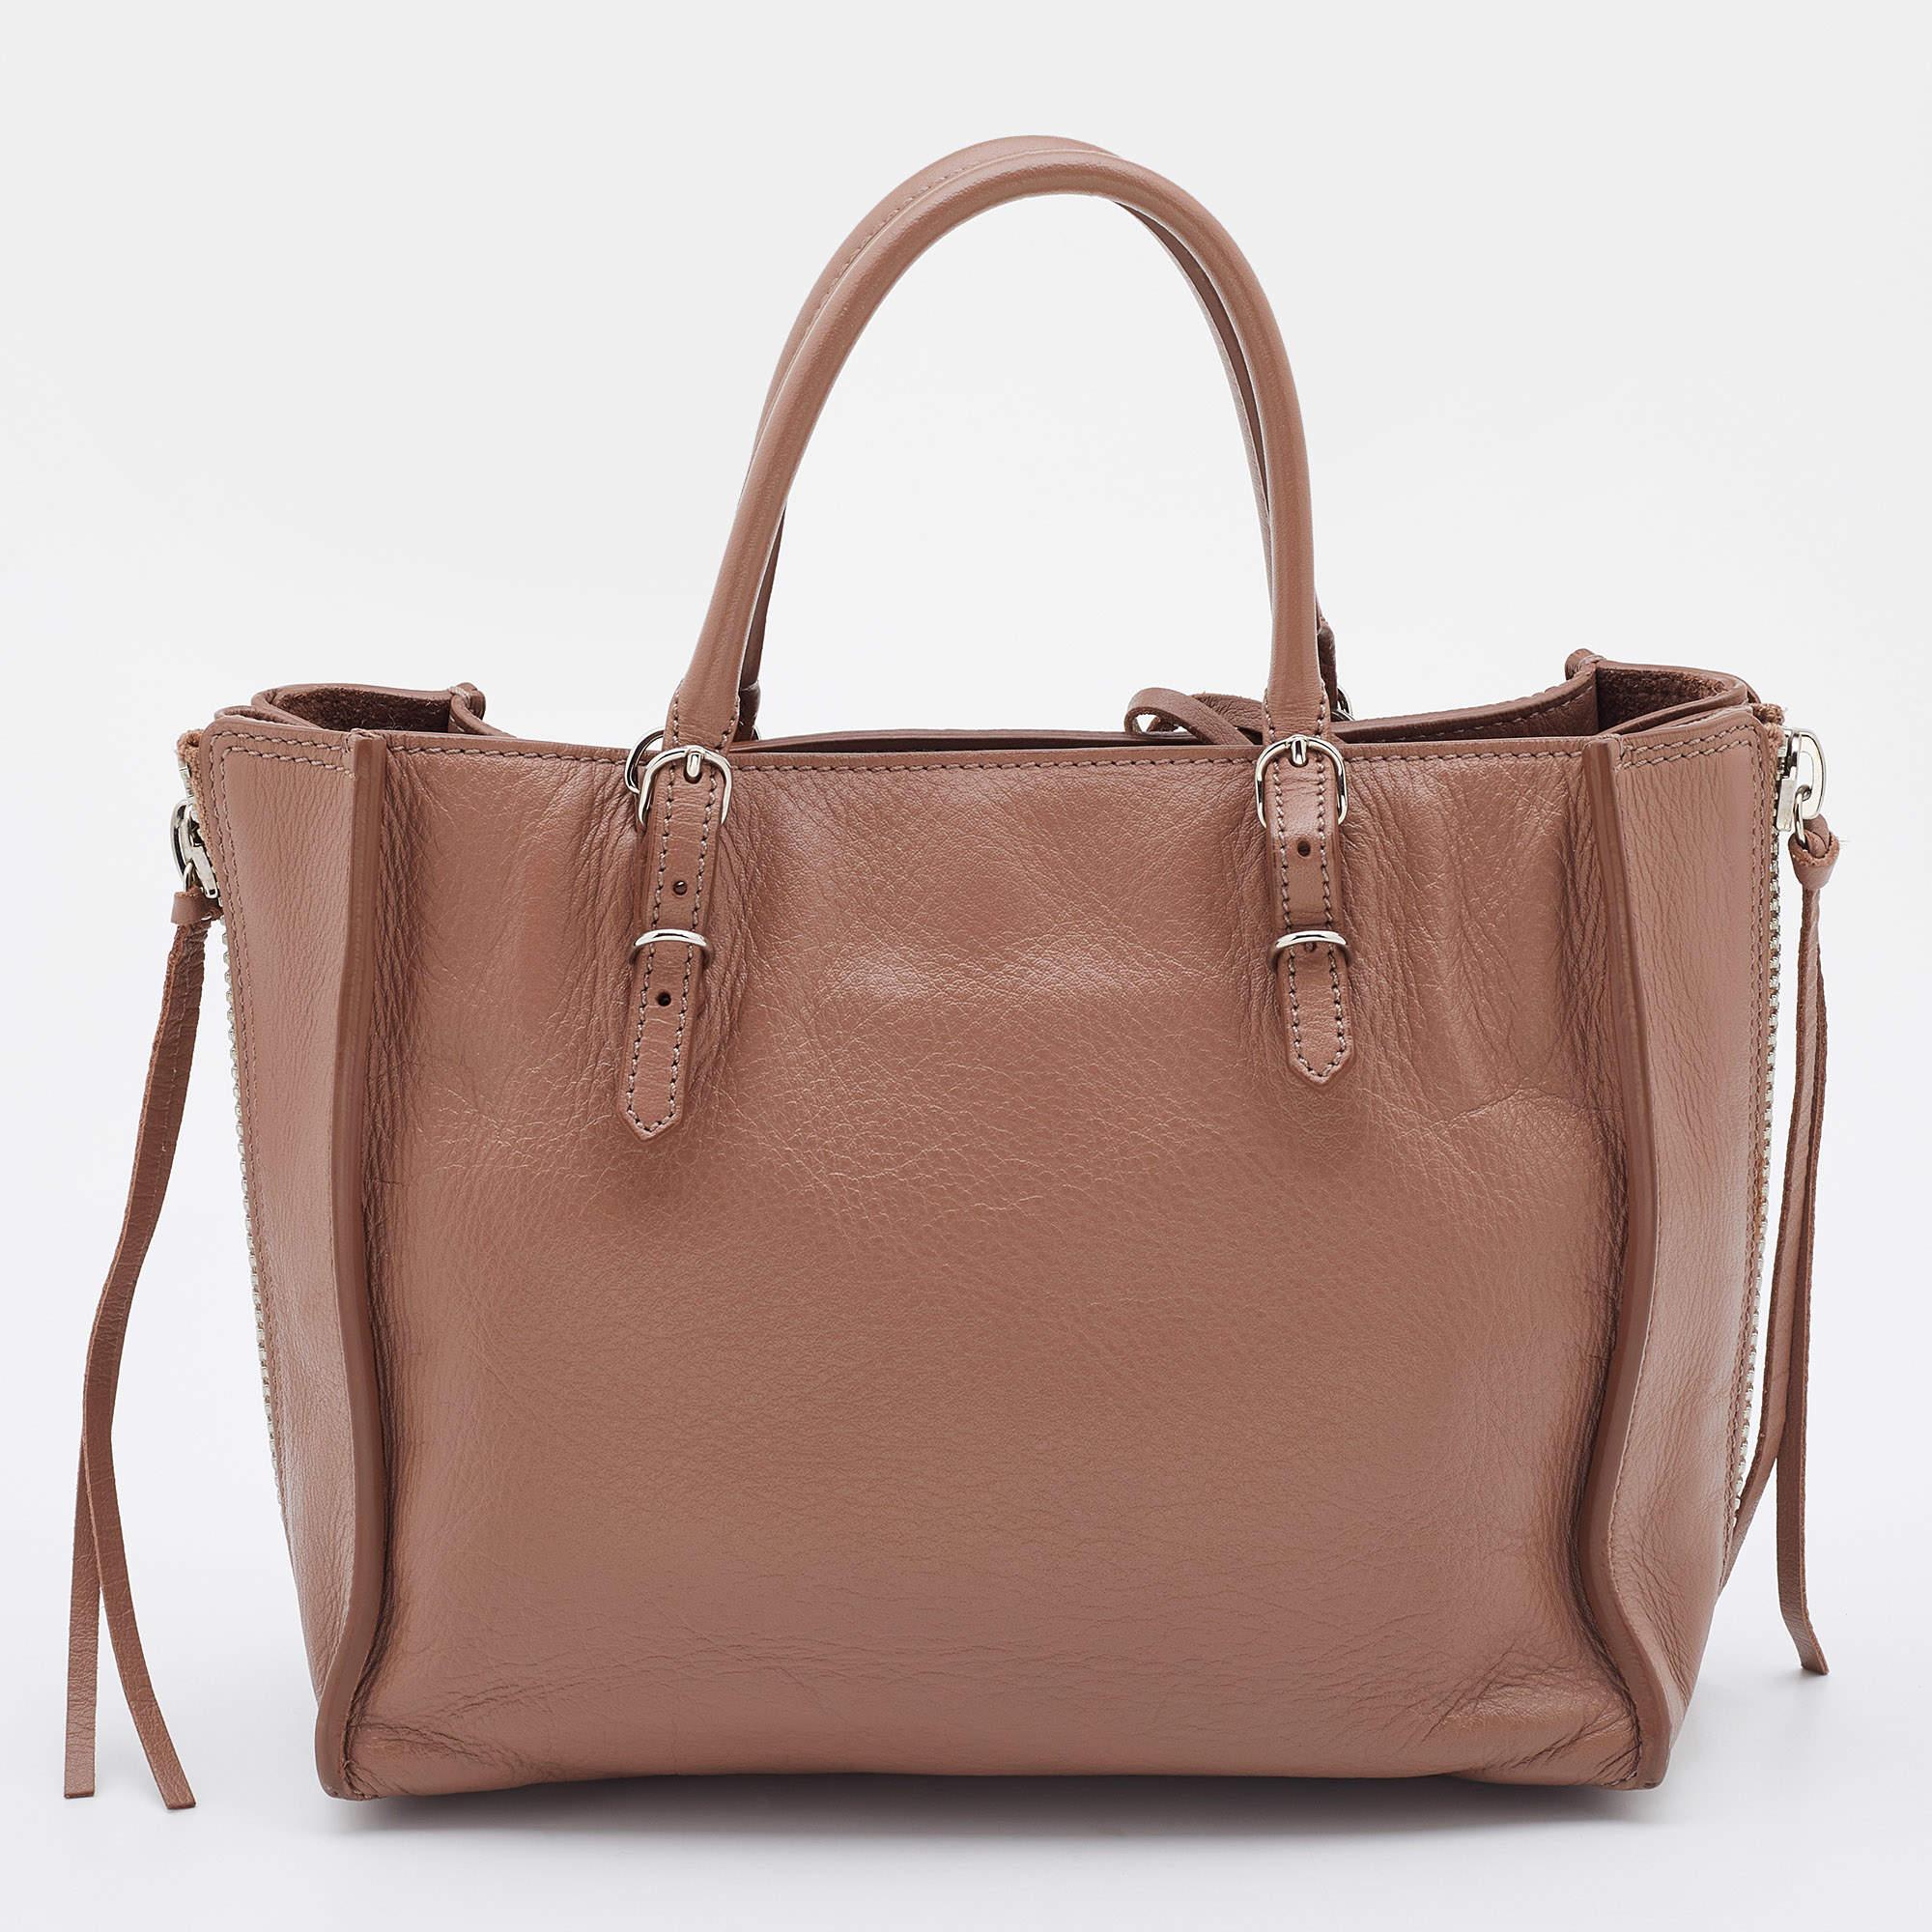 This alluring Balenciaga tote bag for women has been designed to assist you on any day. Convenient to carry and fashionably designed, the tote is cut with skill and sewn into a great shape. It is well-equipped to be a reliable accessory.

Includes: